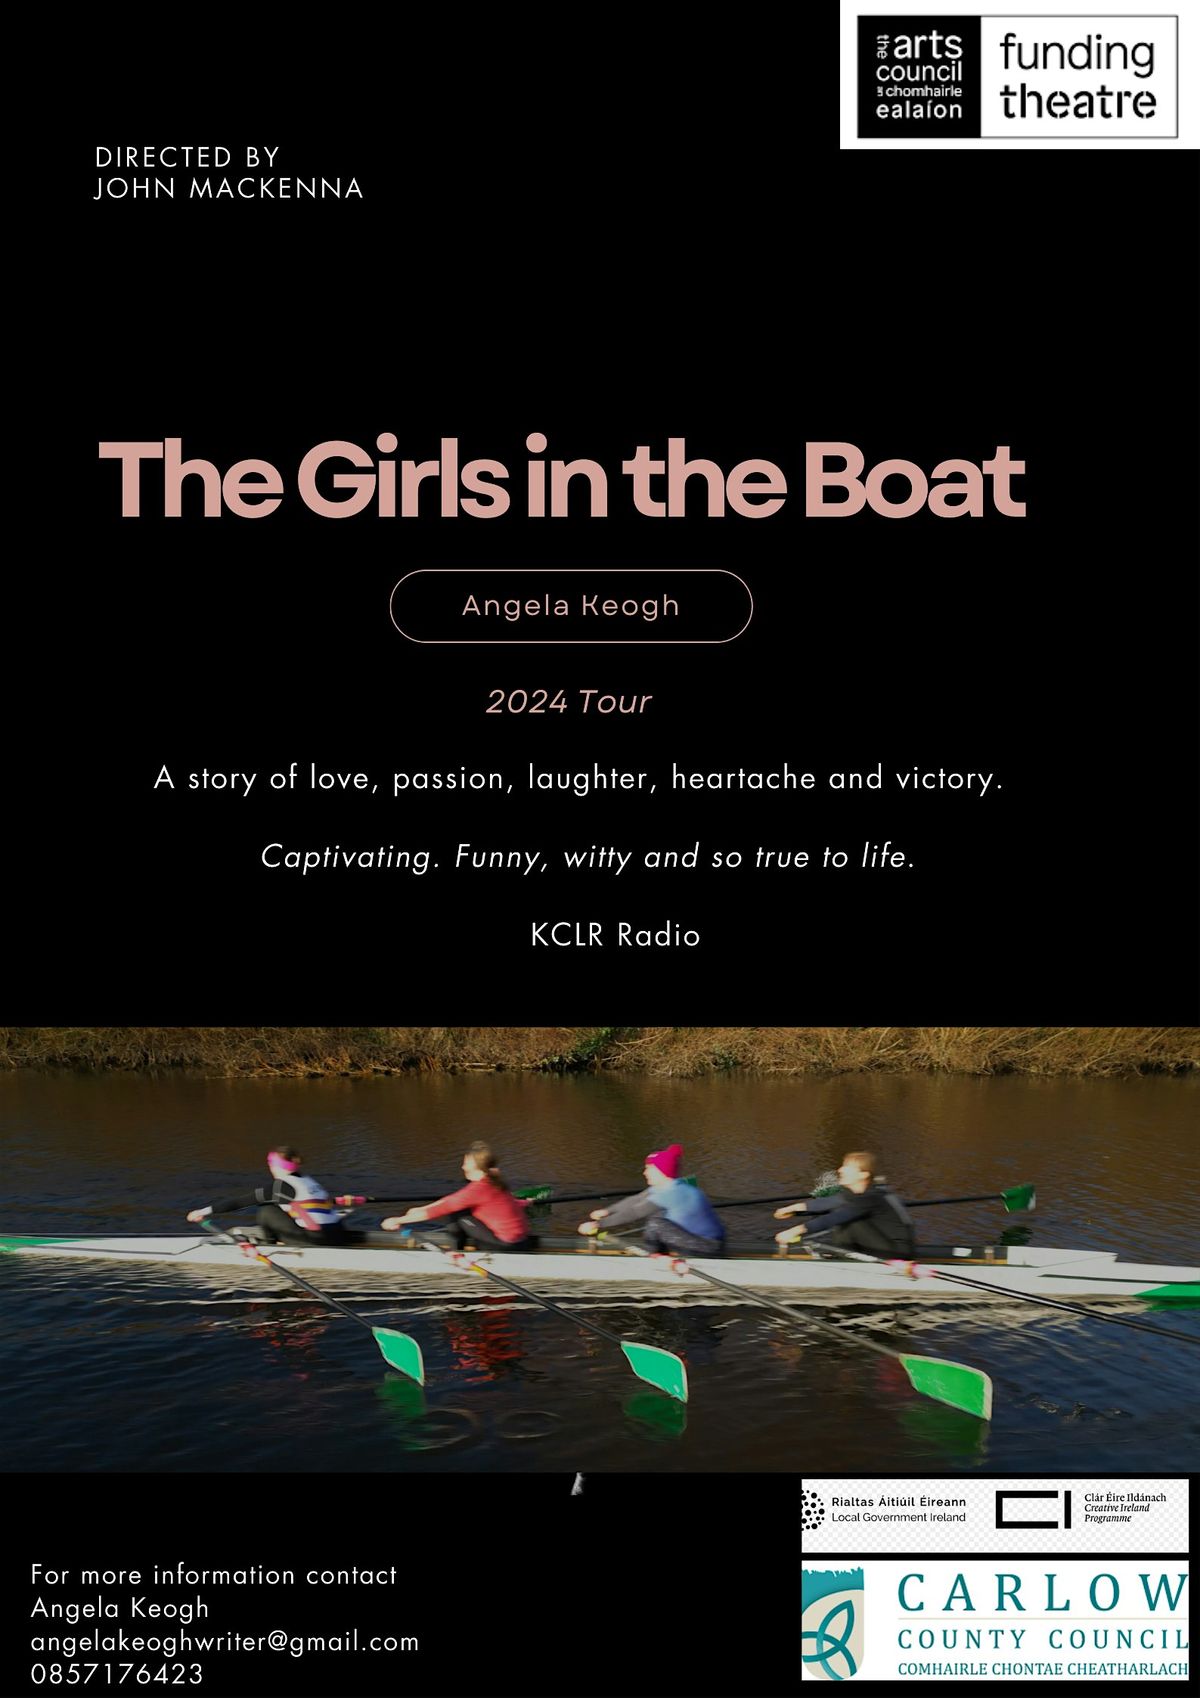 The Girls in the Boat